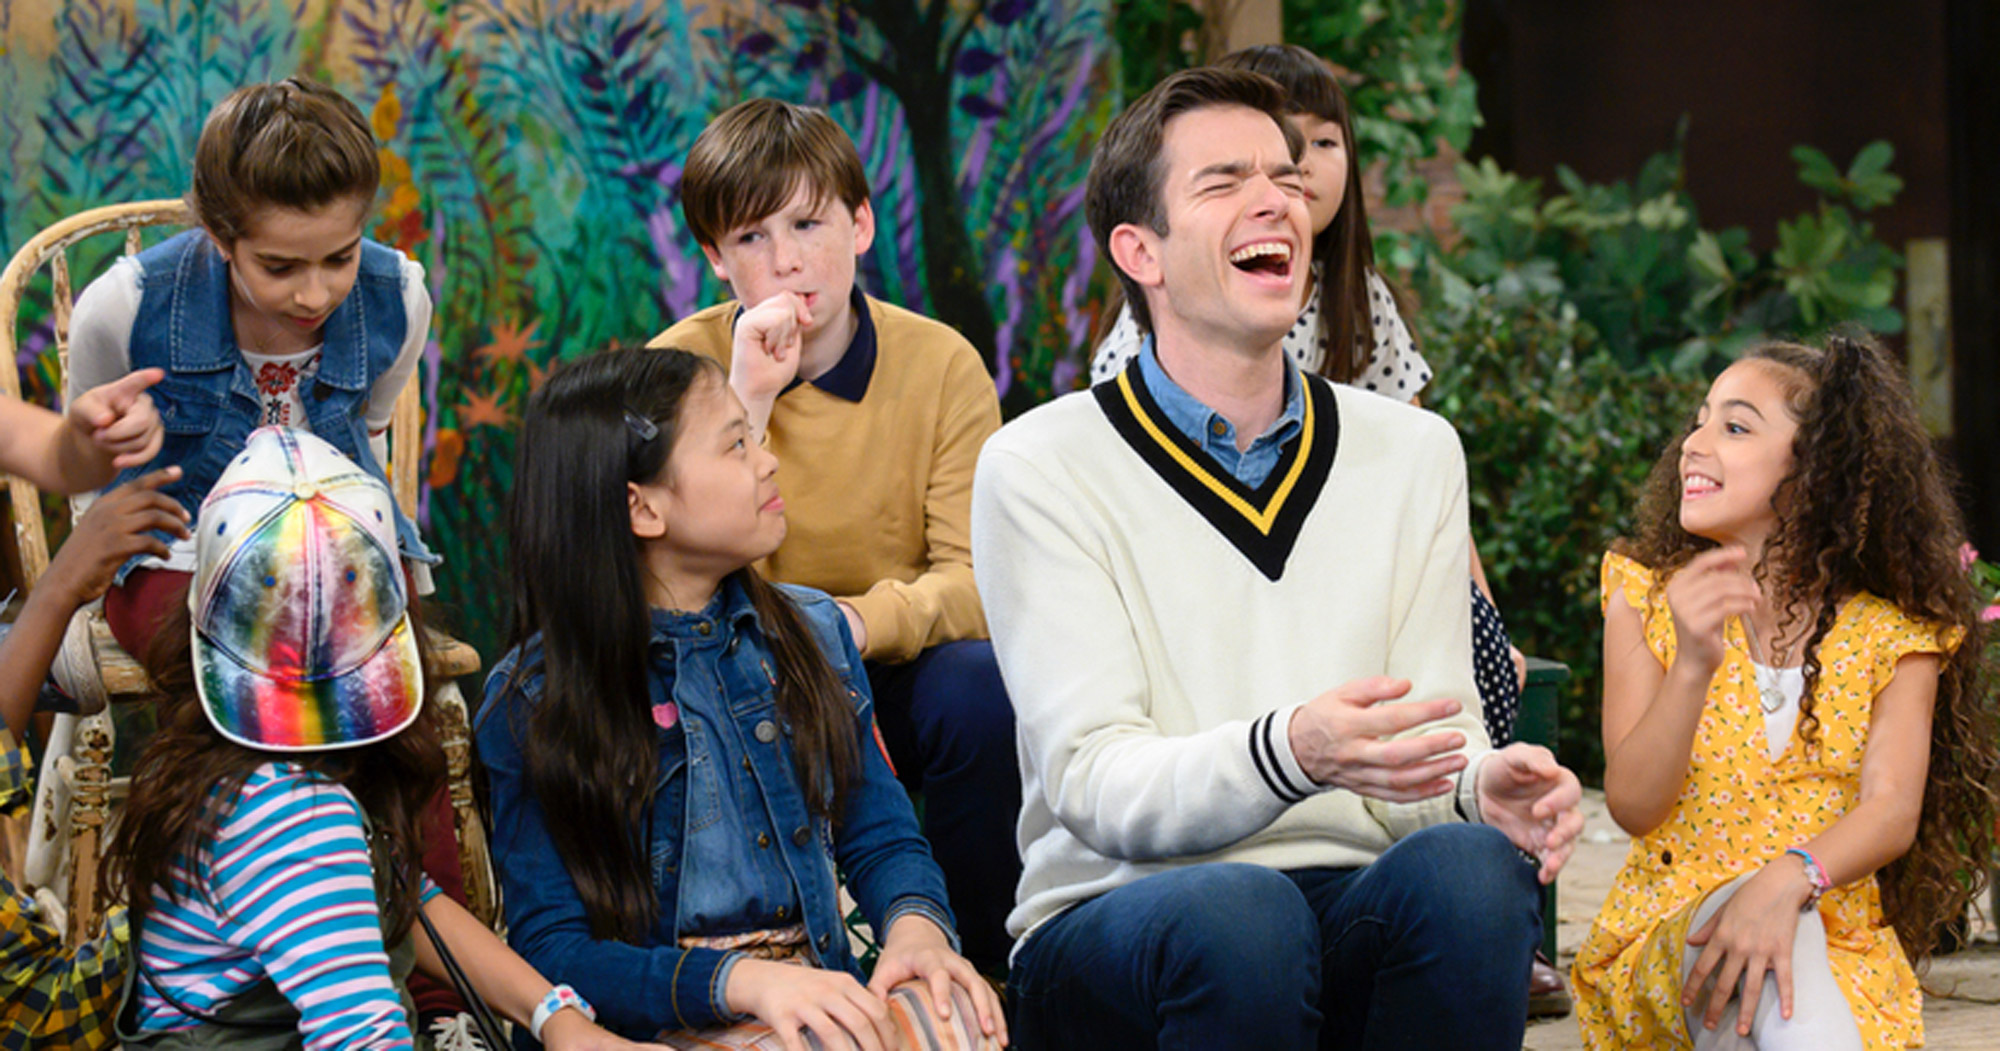 An image from John Mulaney and the Sack Lunch Bunch